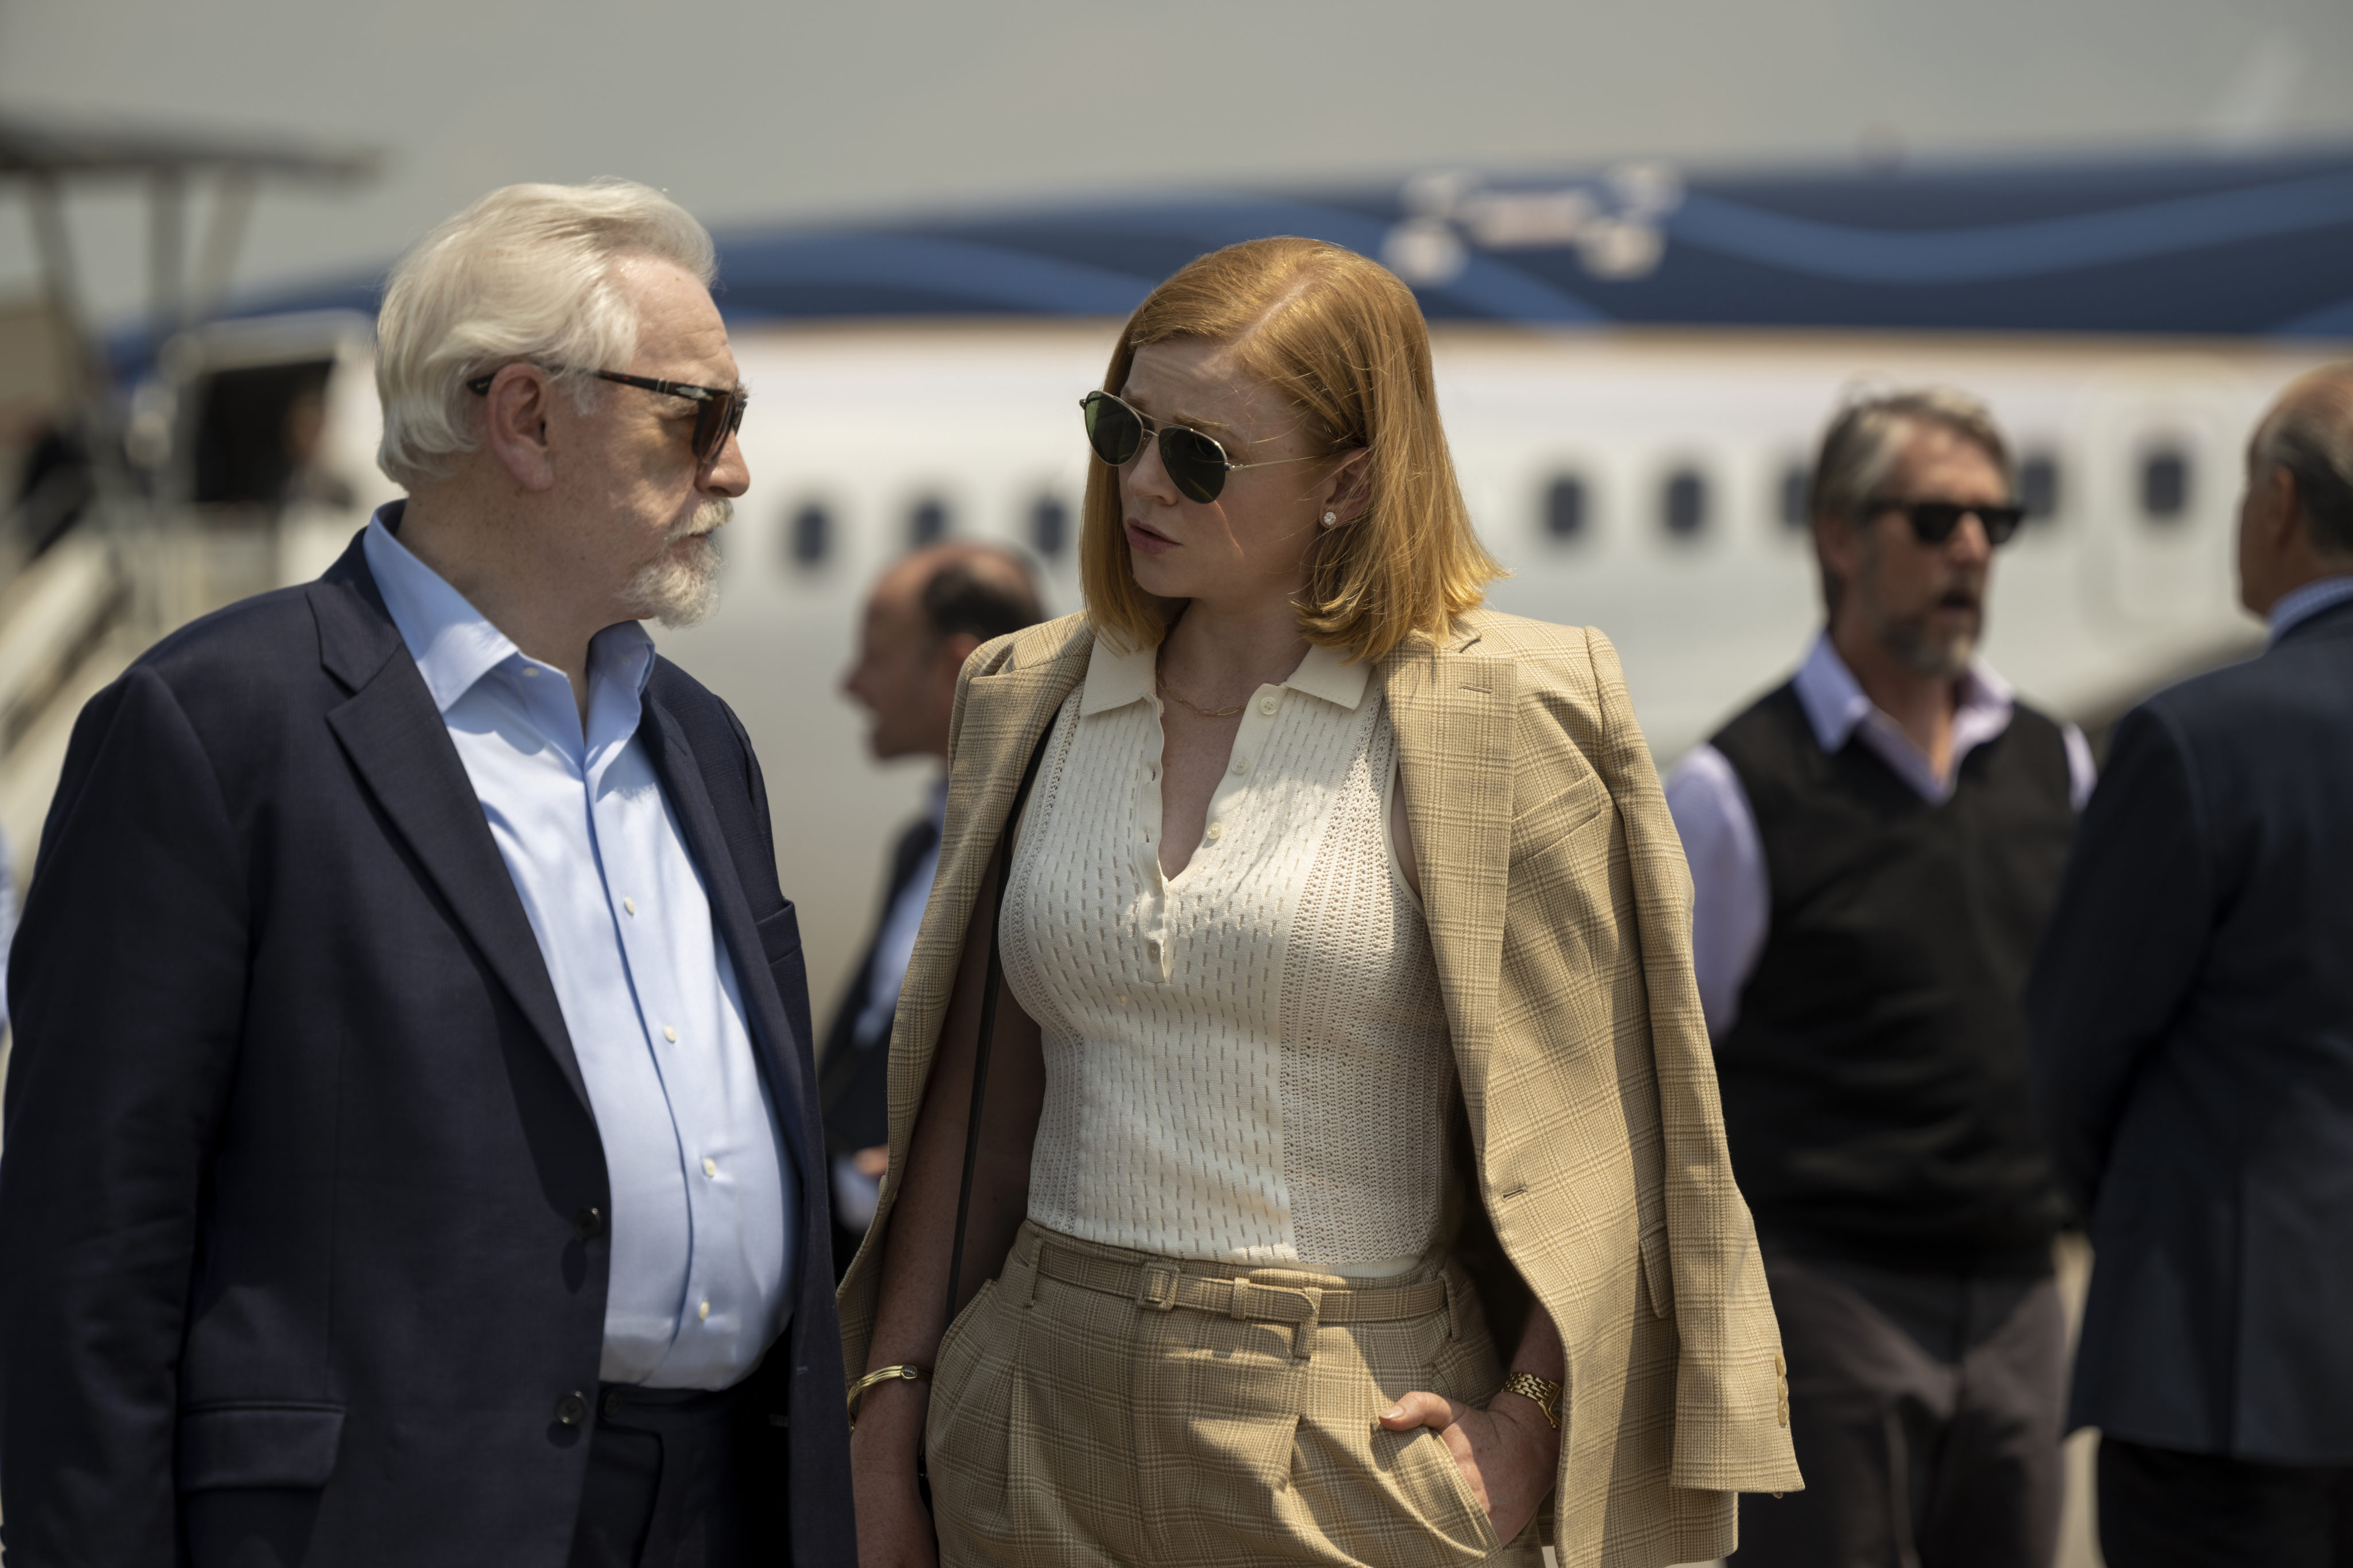 The Fashion In “Succession” Is All About Quiet Luxury